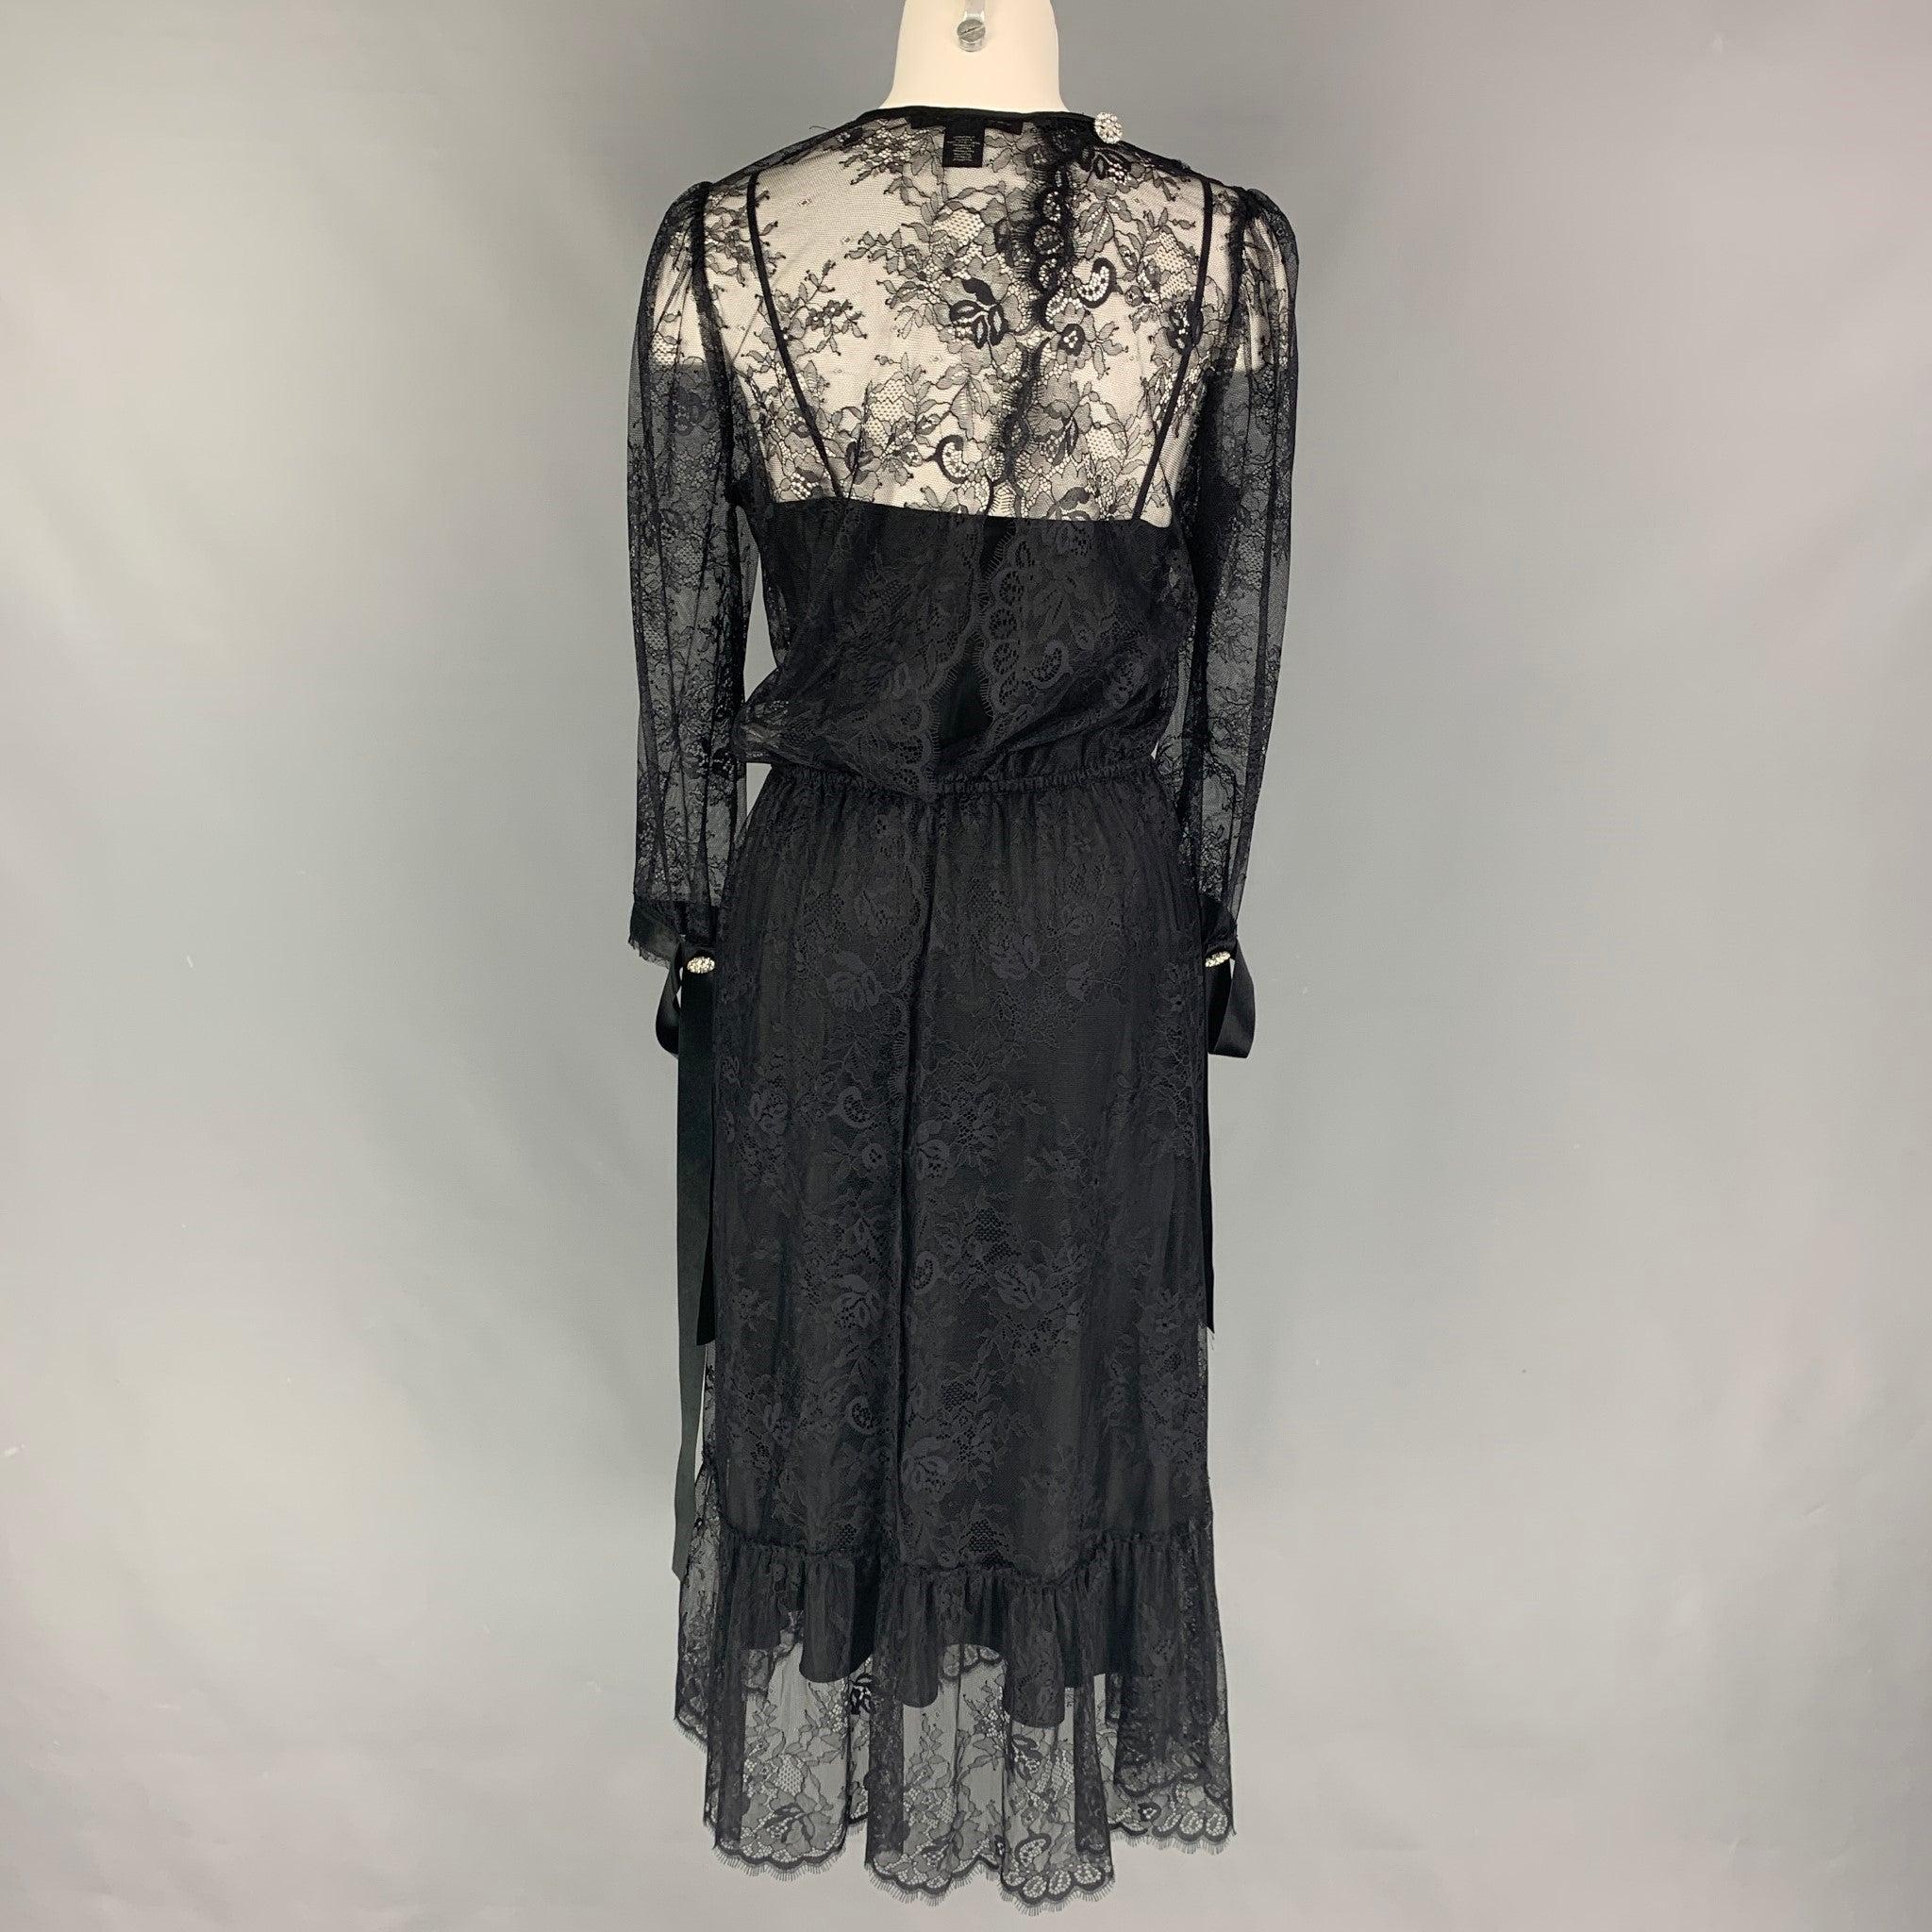 MARC JACOBS Size 4 Black Nylon Lace Sequined A-Line Dress In Good Condition For Sale In San Francisco, CA